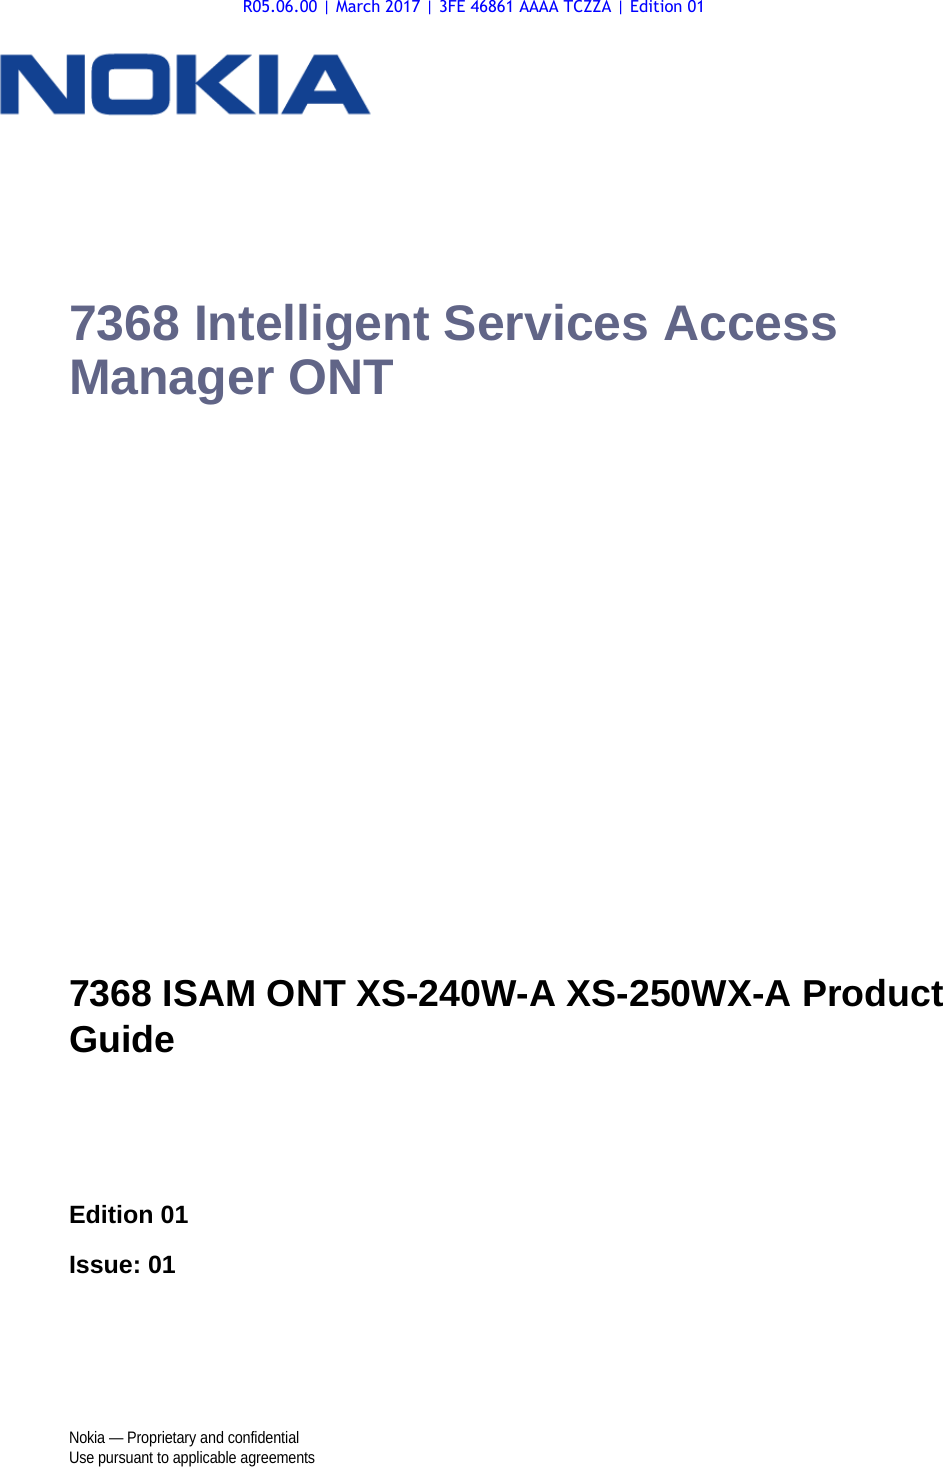 Nokia — Proprietary and confidentialUse pursuant to applicable agreements 7368 Intelligent Services Access Manager ONT7368 ISAM ONT XS-240W-A XS-250WX-A Product GuideEdition 01Issue: 01 7368 ISAM ONT XS-240W-A XS-250WX-A Product GuideR05.06.00 | March 2017 | 3FE 46861 AAAA TCZZA | Edition 01